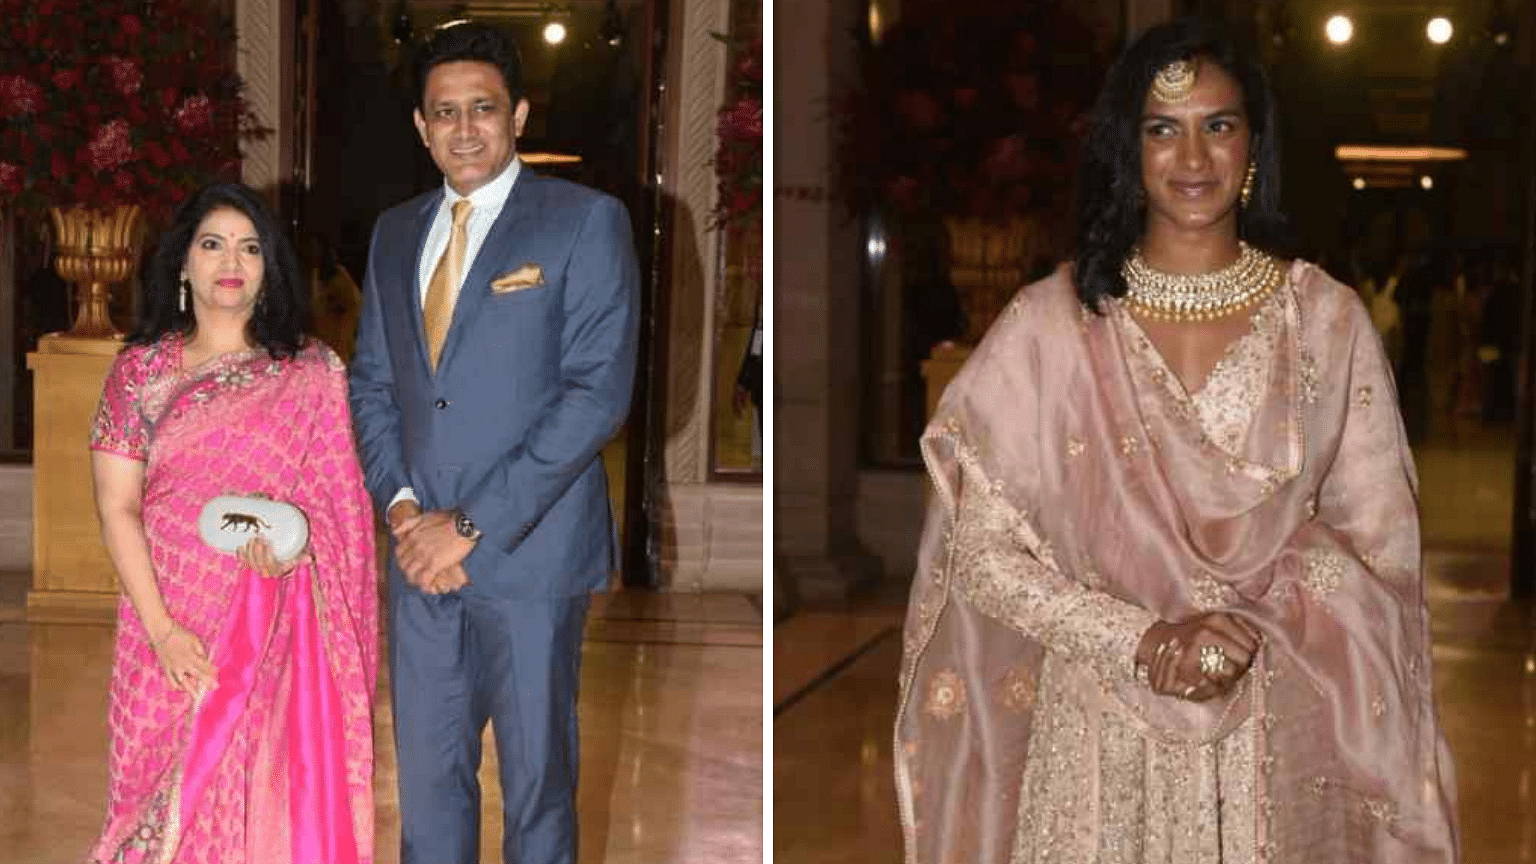 Anil Kumble with his wife Chethana and PV Sindhu (right) at the reception of Ranveer Singh and Deepika Padukone on Wednesday in Bengaluru.&nbsp;